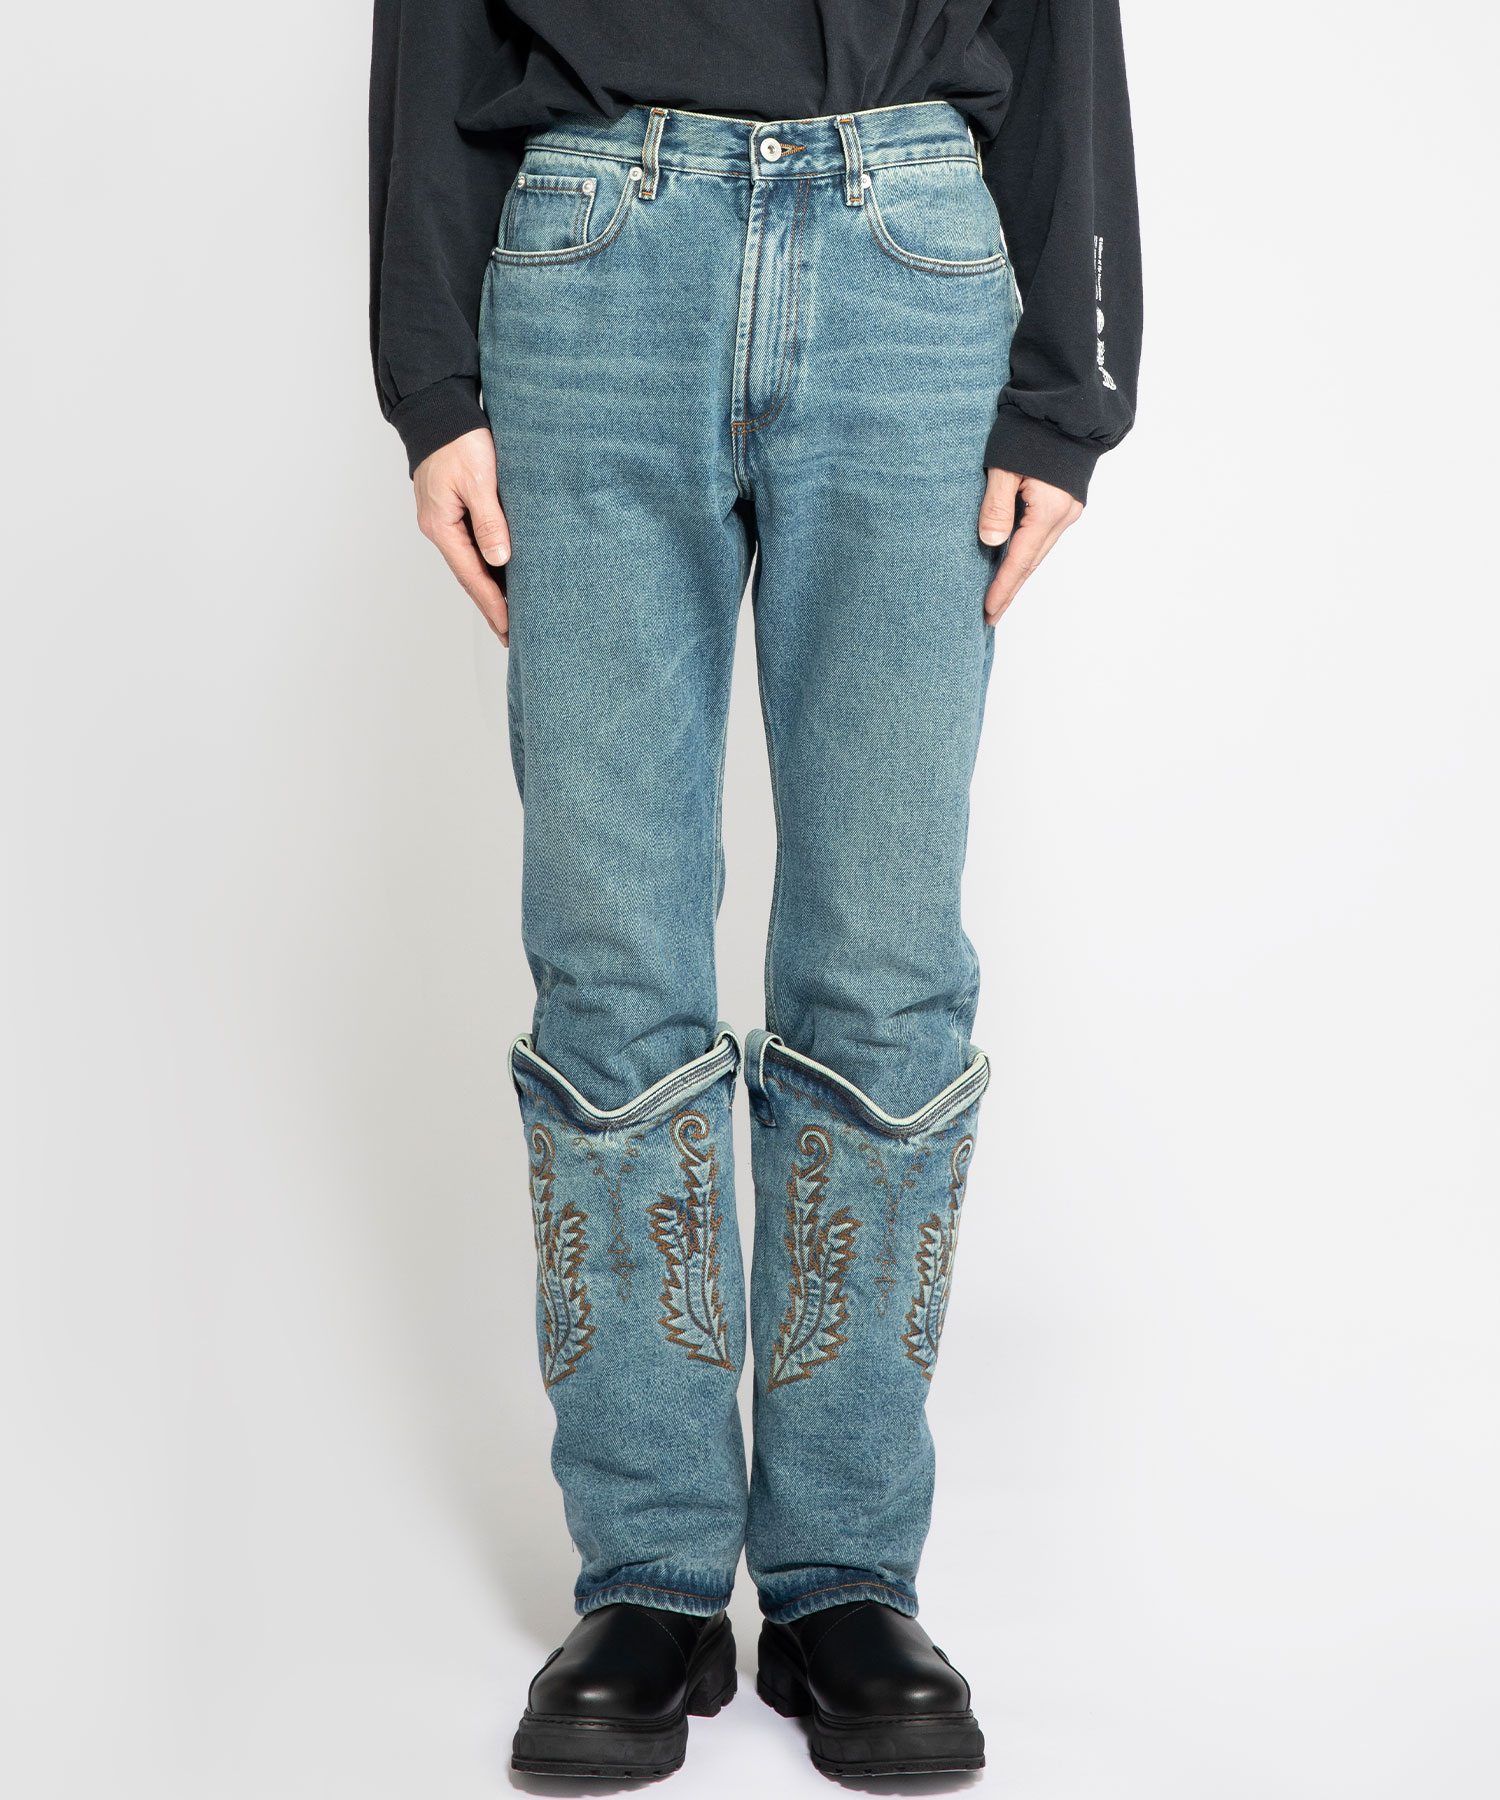 Y/PROJECT Mini Cowboy Cuff Jeans 新品未使用MadeinPo